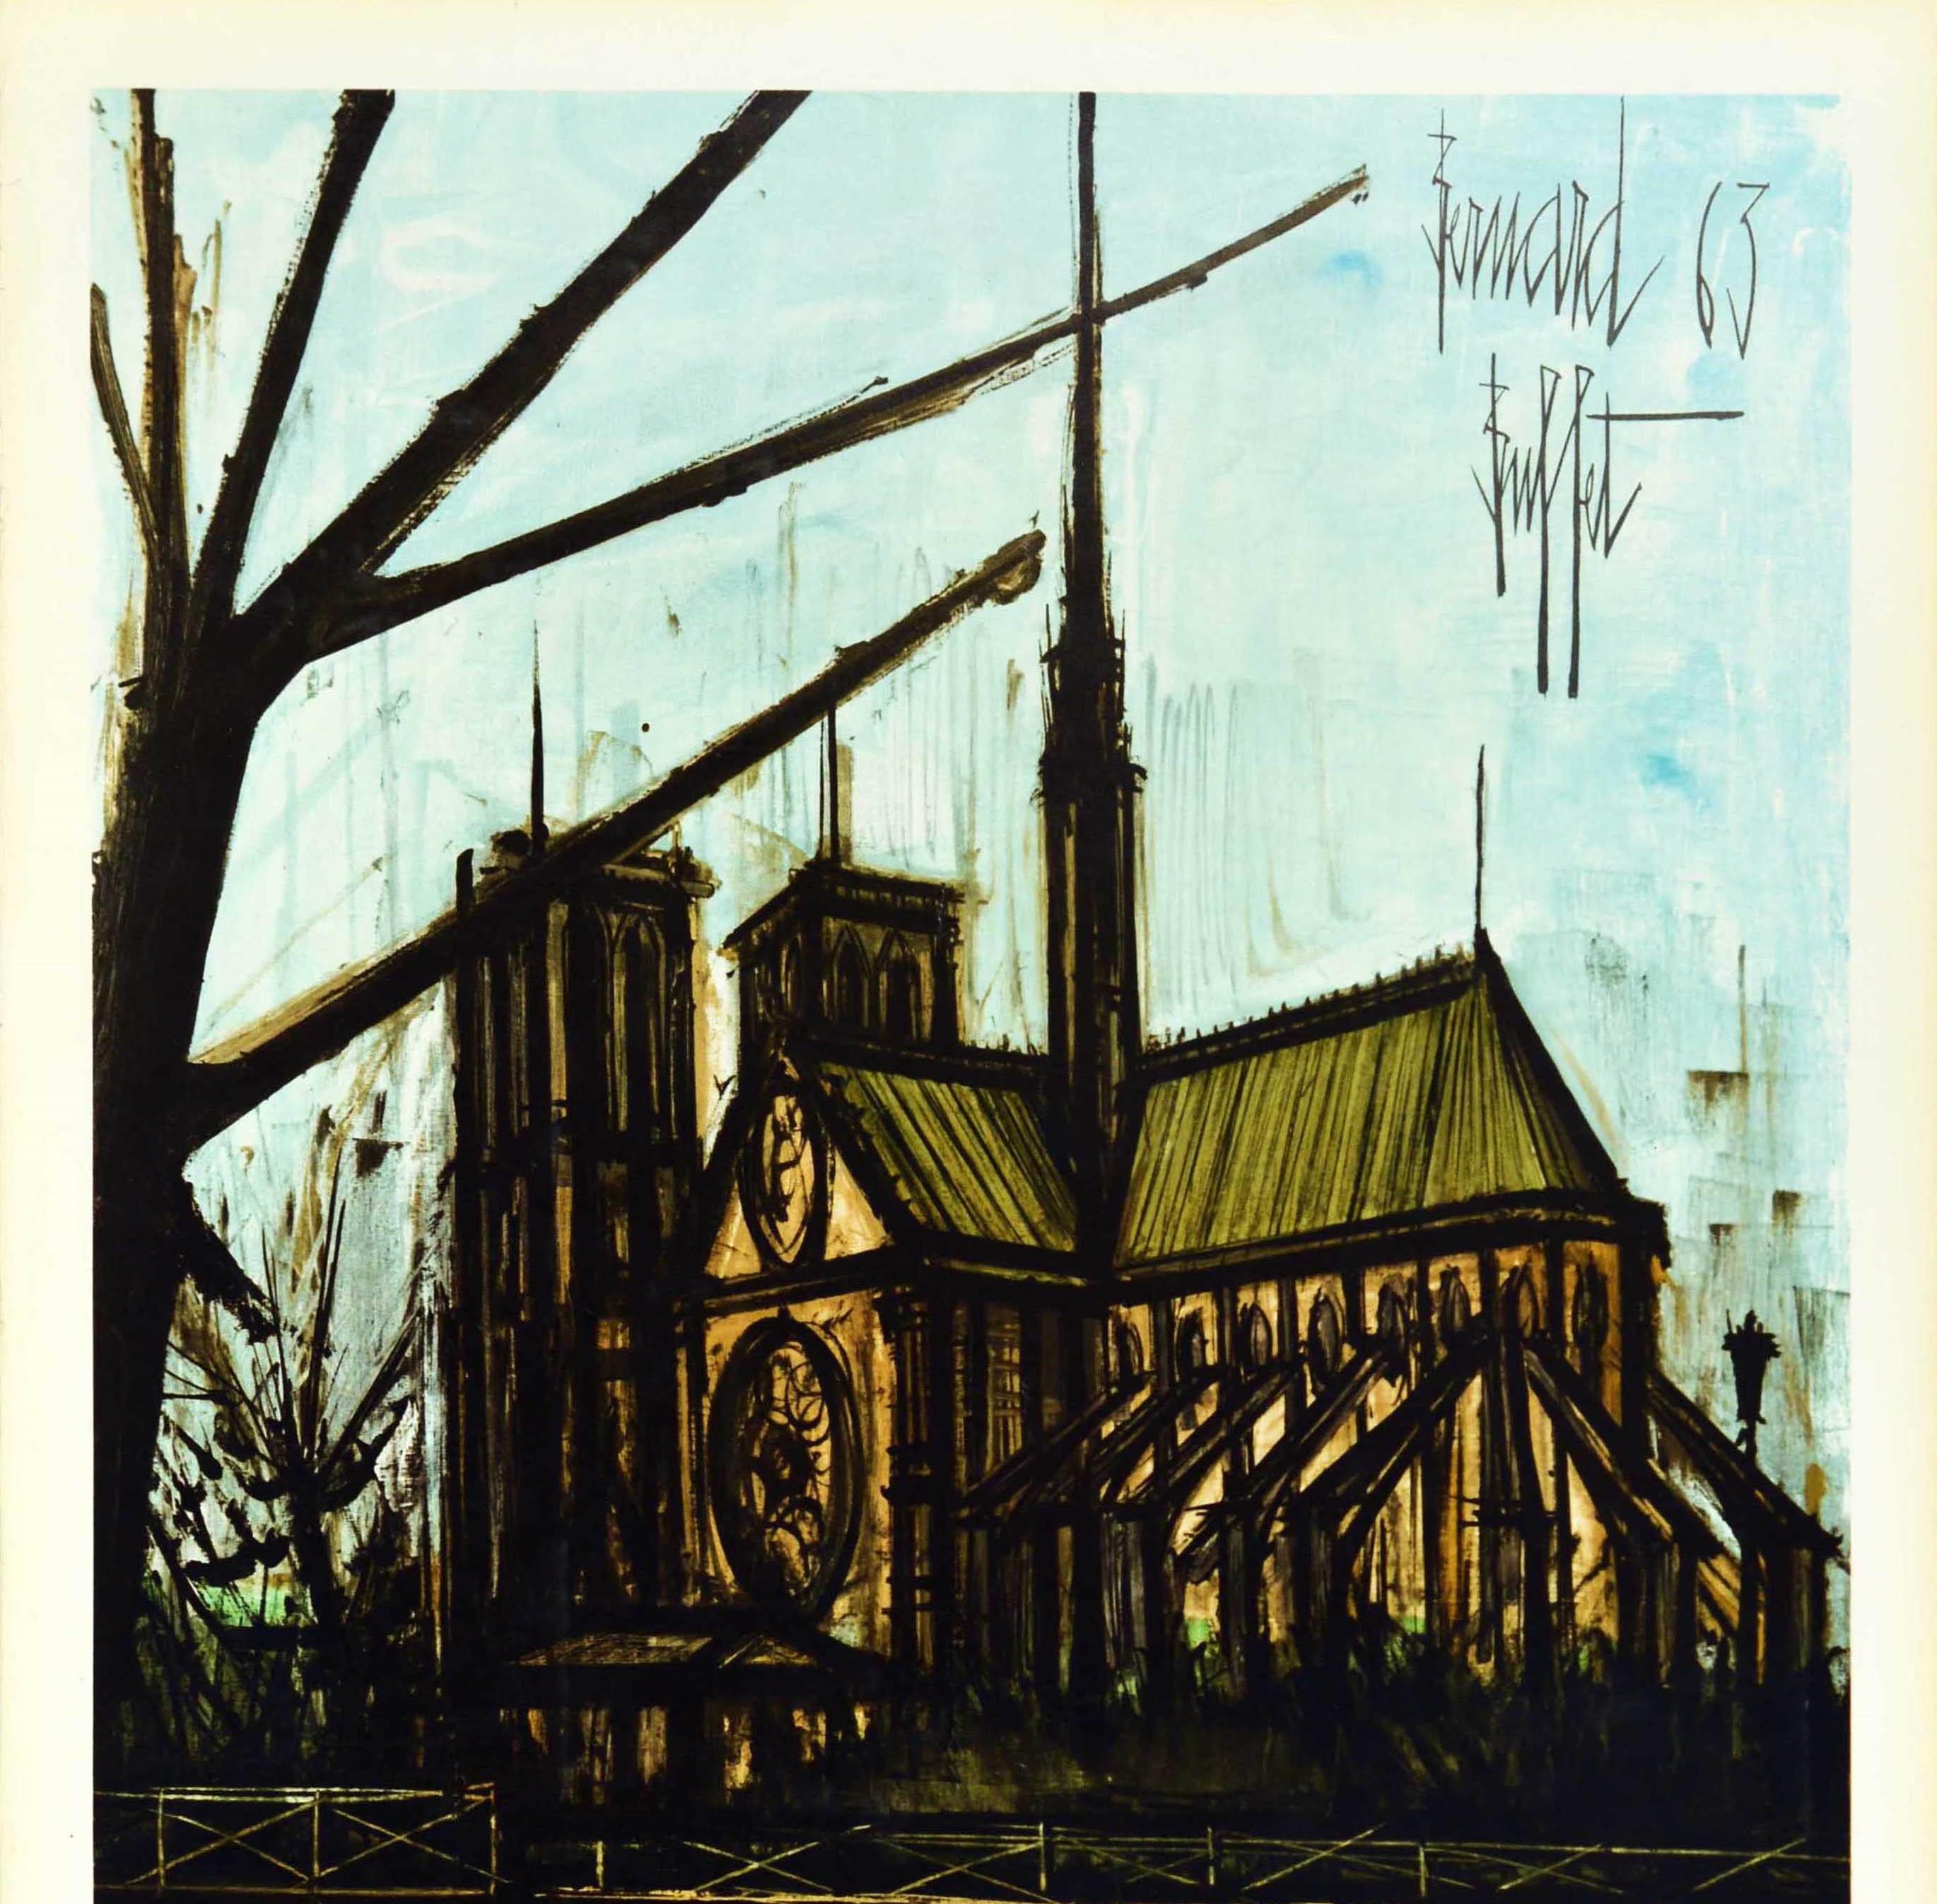 Original vintage travel poster by French Railways promoting tourism to Paris featuring an illustration by a French expressionism painter Bernard Buffet (1928-1999) depicting the historic medieval Notre Dame cathedral on the Ile de la Cite with a